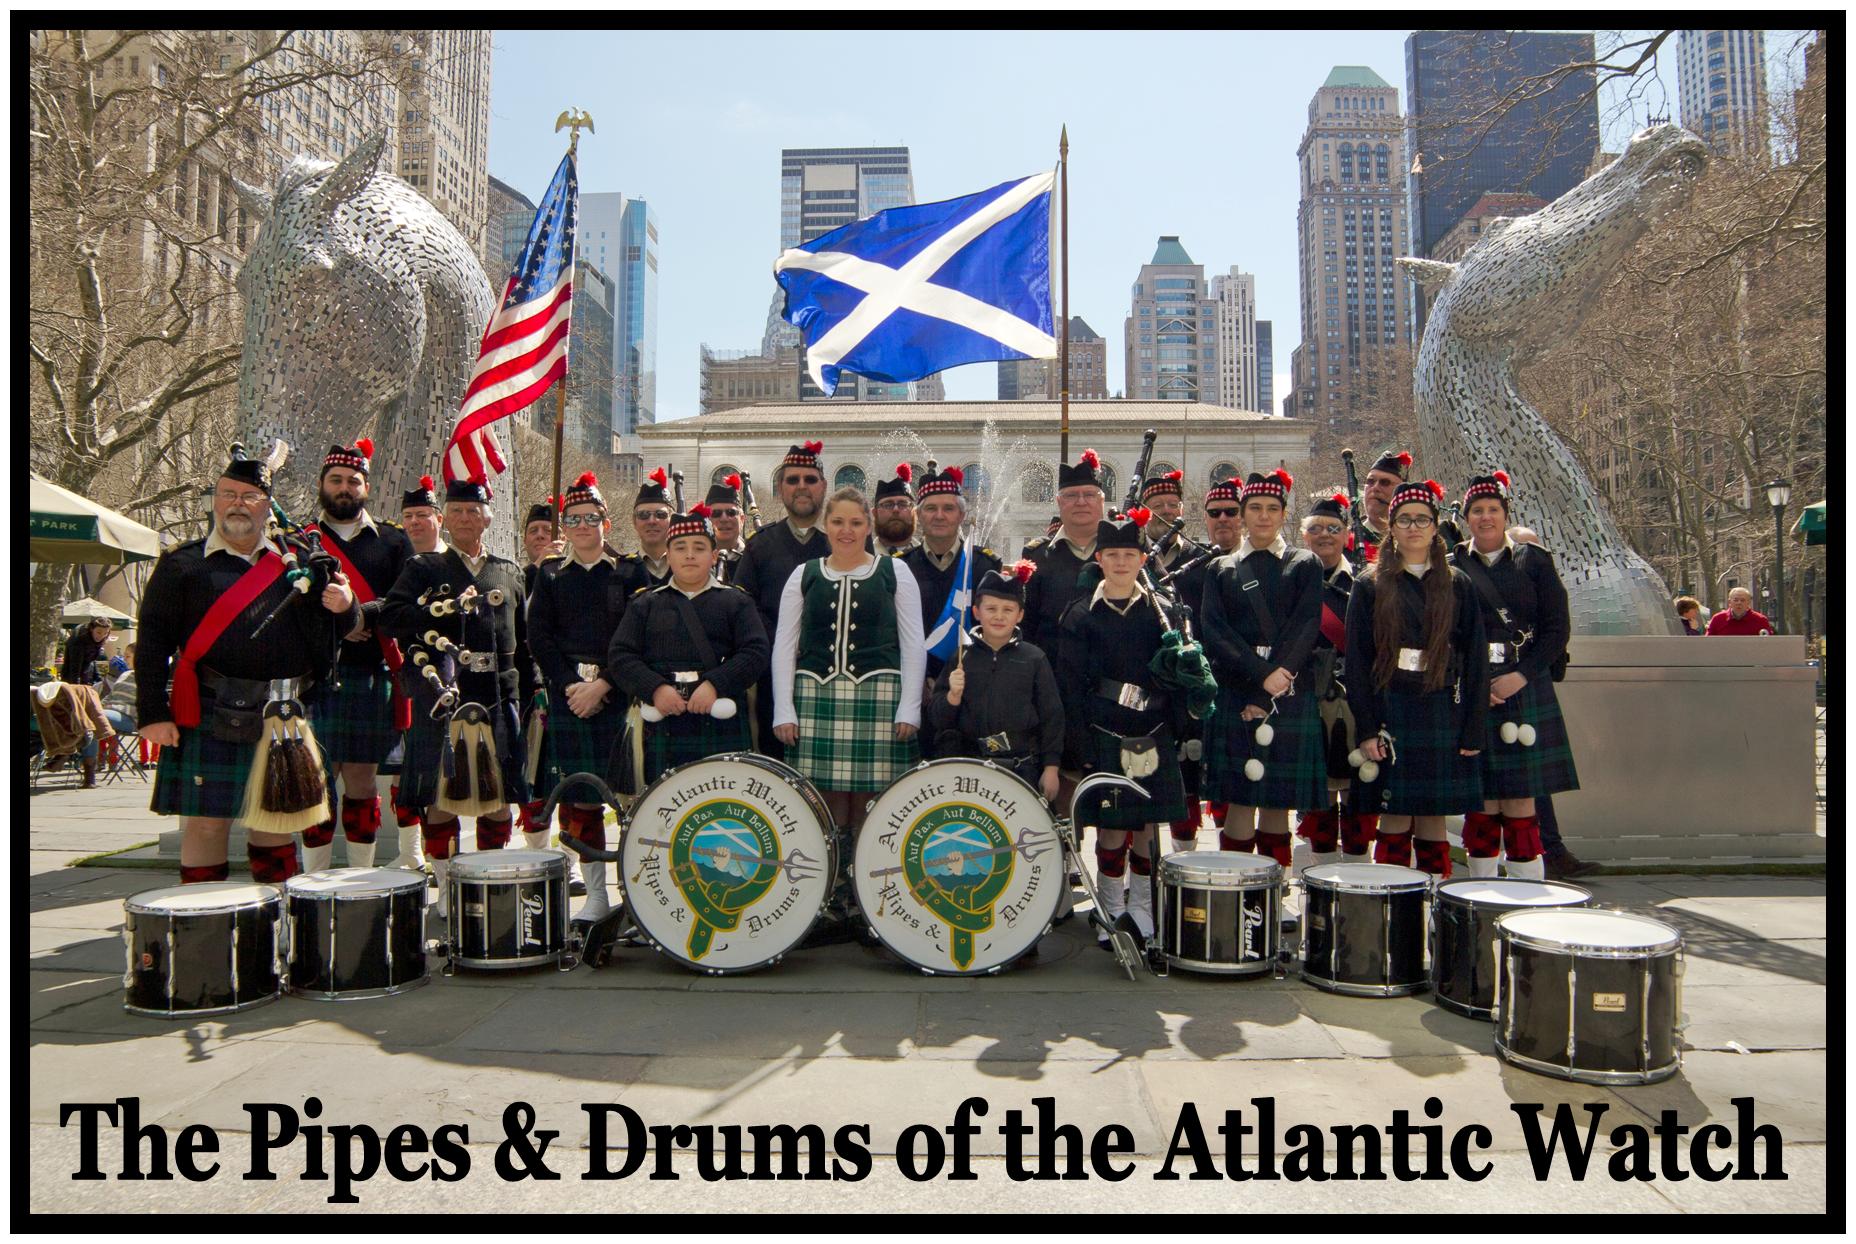 ATLANTIC WATCH PIPES & DRUMS